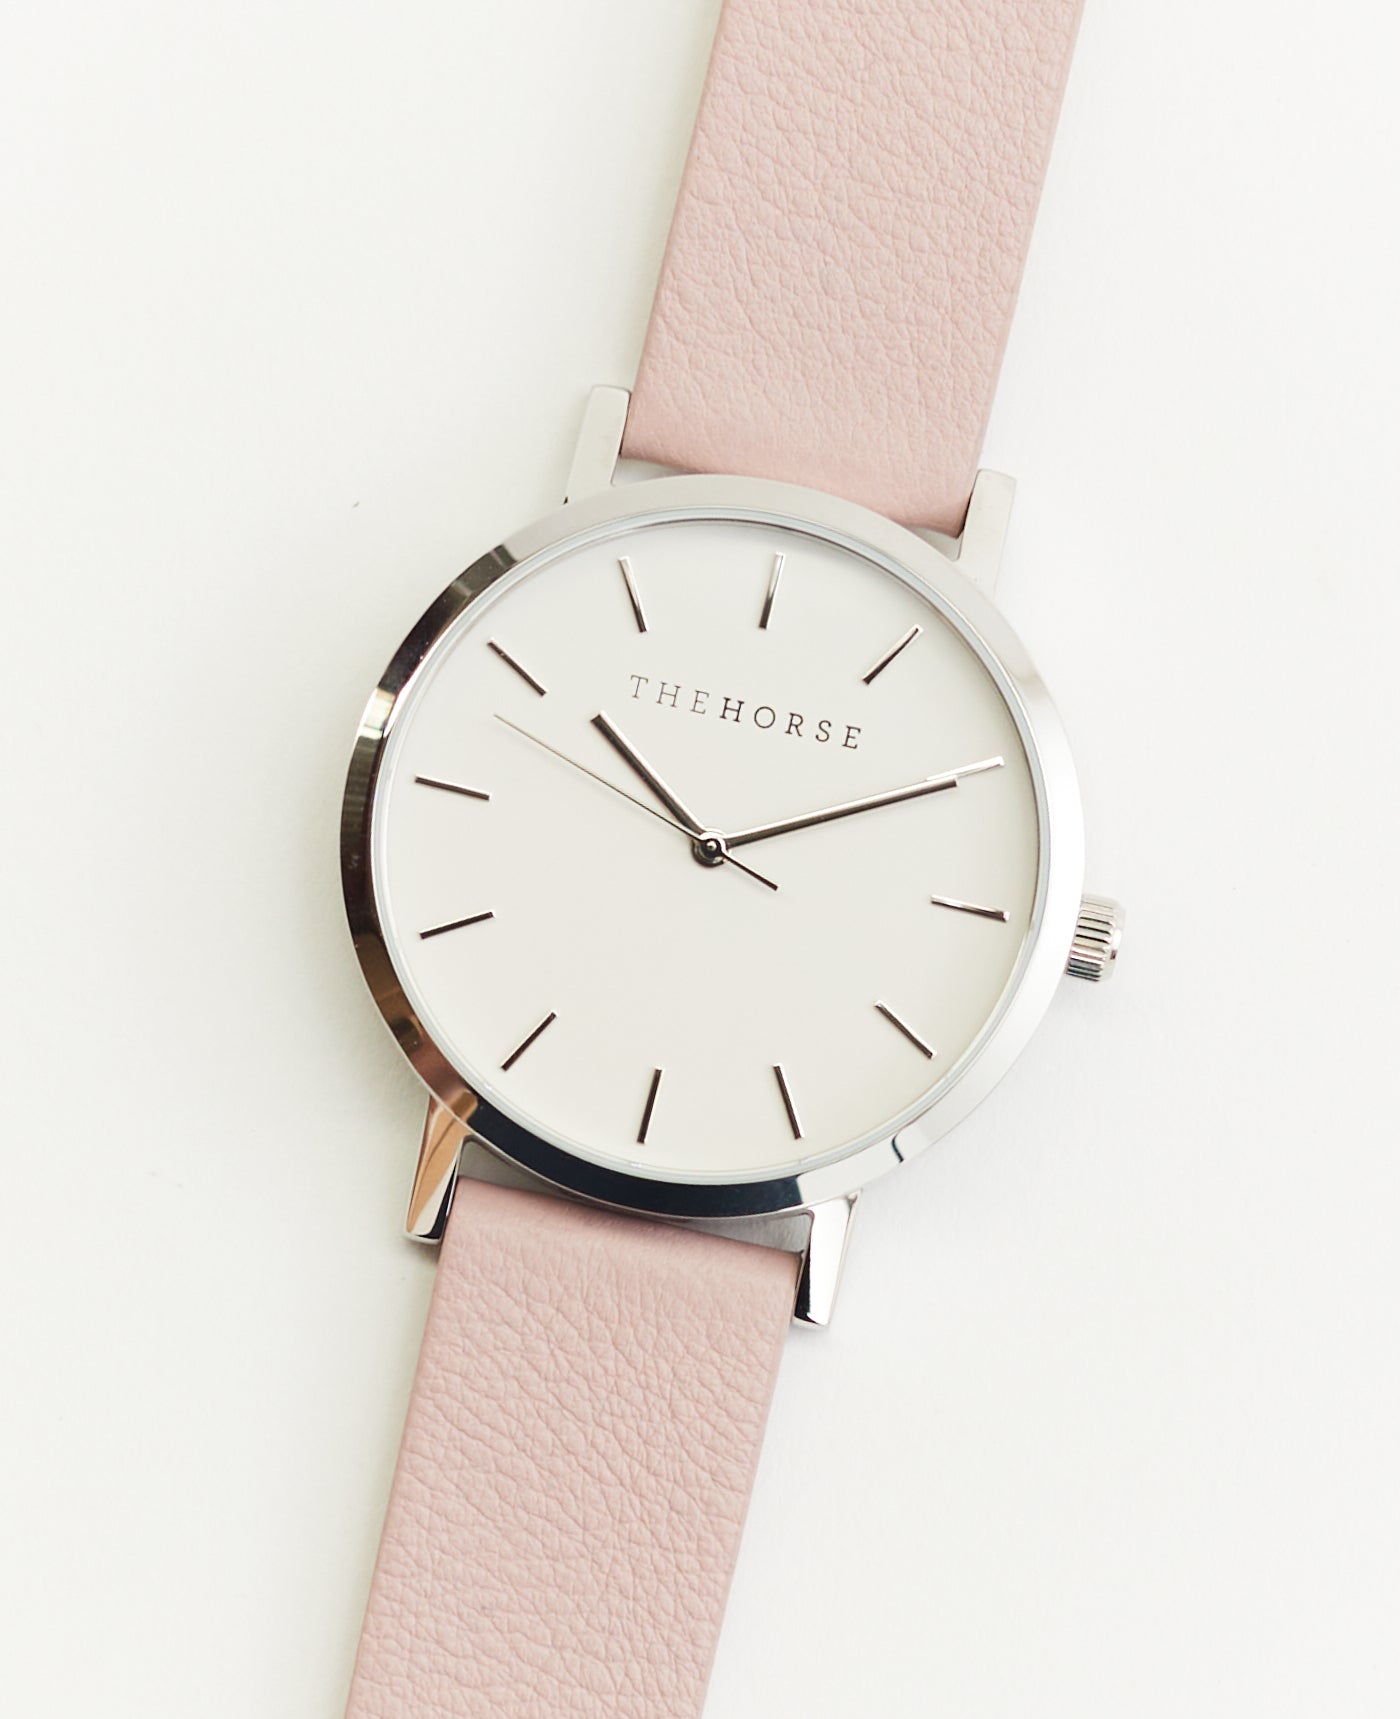 The Mini Original: Polished Silver Case / White Dial / Dirty Pink Leather